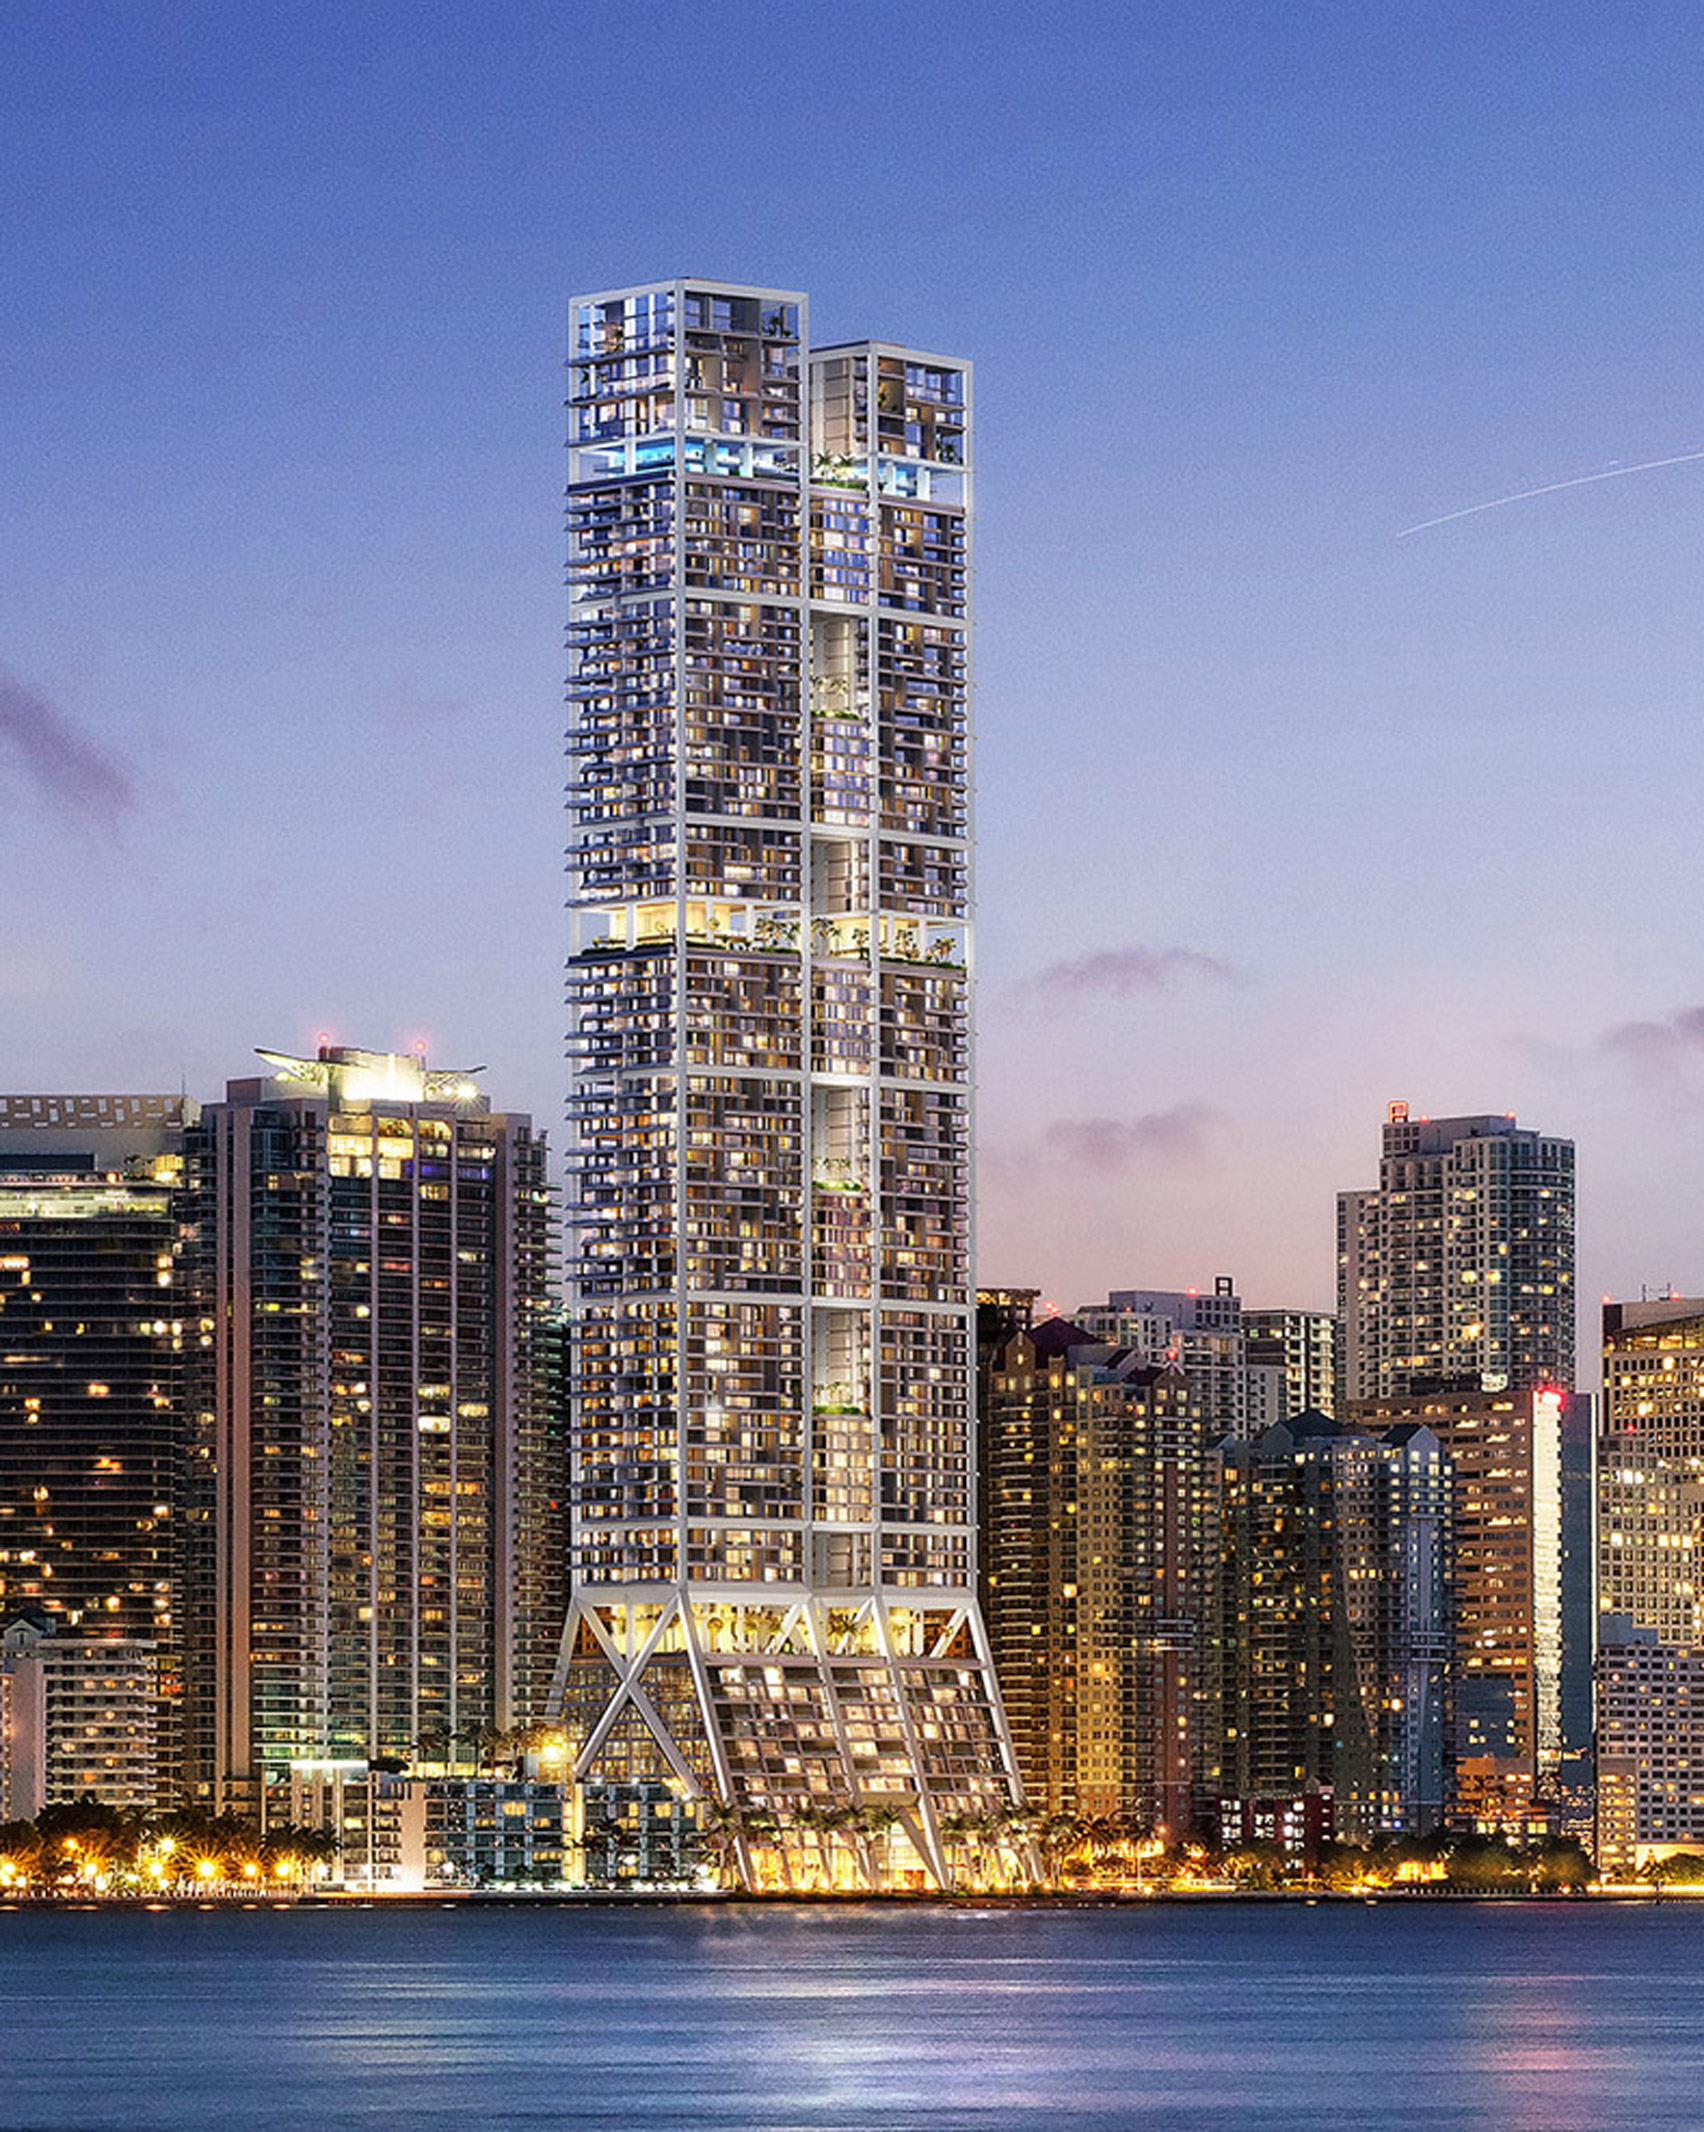 The Towers, Miami, USA, by Foster + Partners